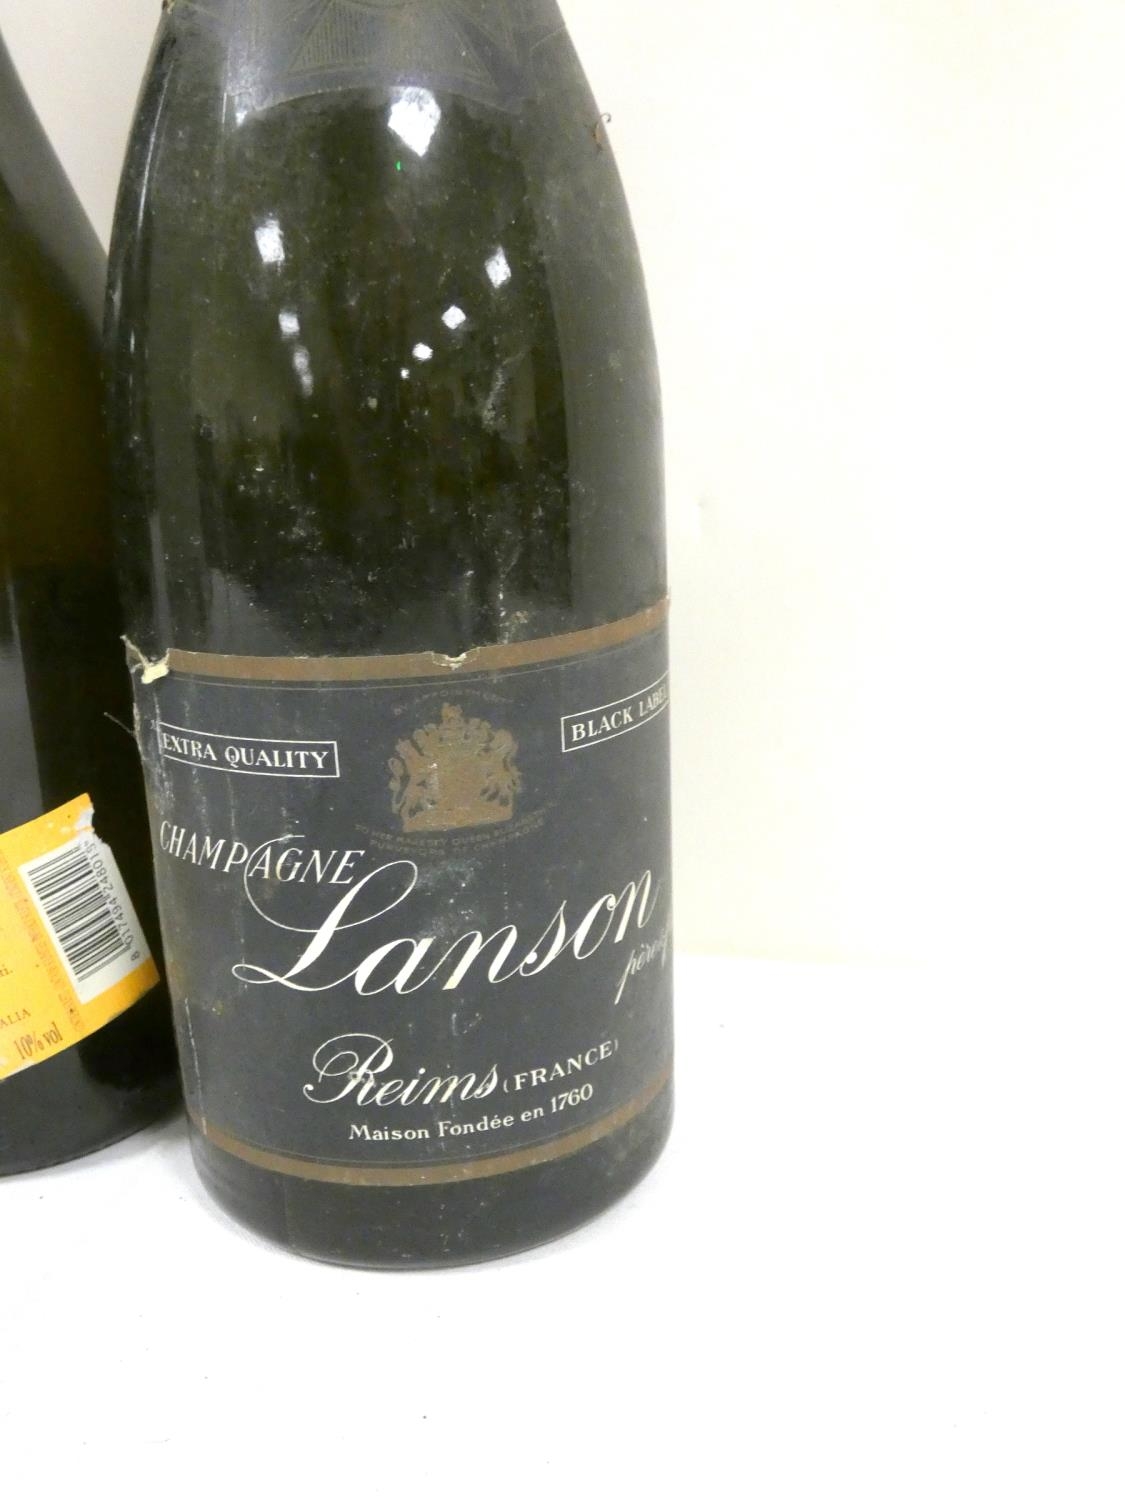 LANSON Black Label Champagne no abv. or vol. stated, Prosecco 10% abv. 70cl, LAMBRUSCO Rose 5.5% - Image 4 of 4